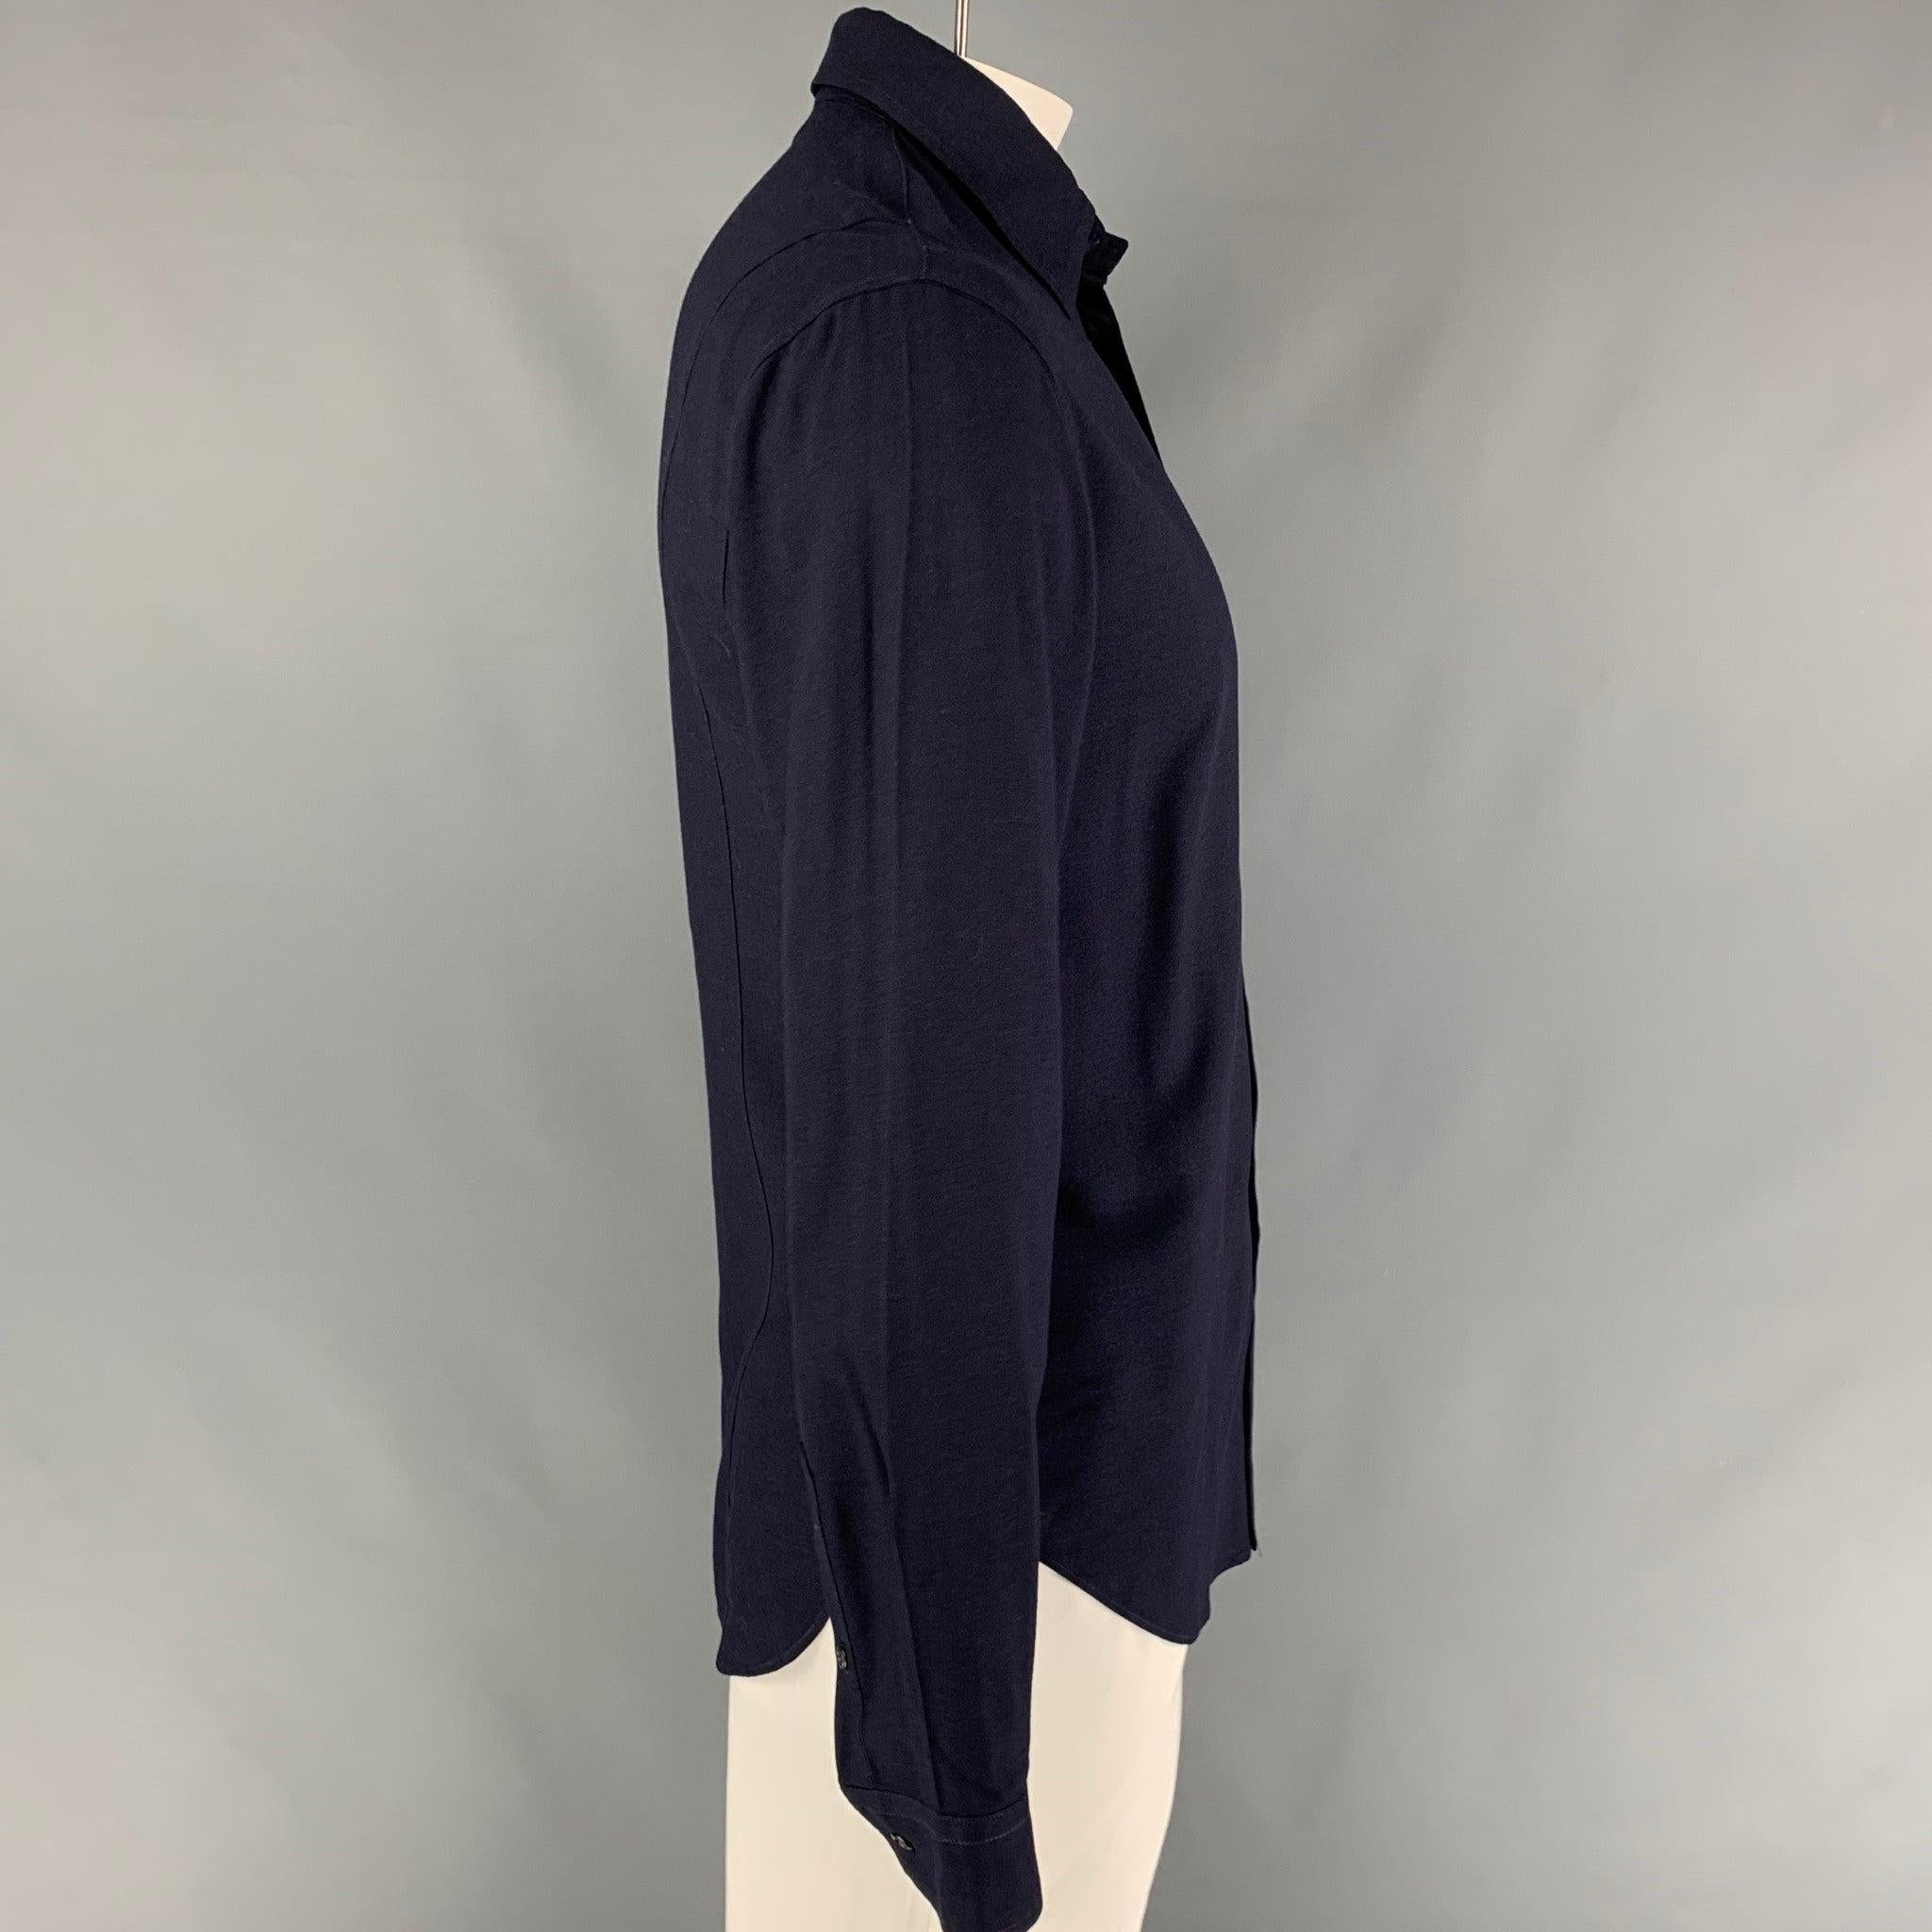 EMPORIO ARMANI long sleeve shirt comes in a navy viscose featuring a classic style, spread collar, and a buttoned closure.
Very Good
Pre-Owned Condition. 

Marked:   M  

Measurements: 
 
Shoulder: 20 inches  Chest: 40 inches  Sleeve: 26.5 inches 